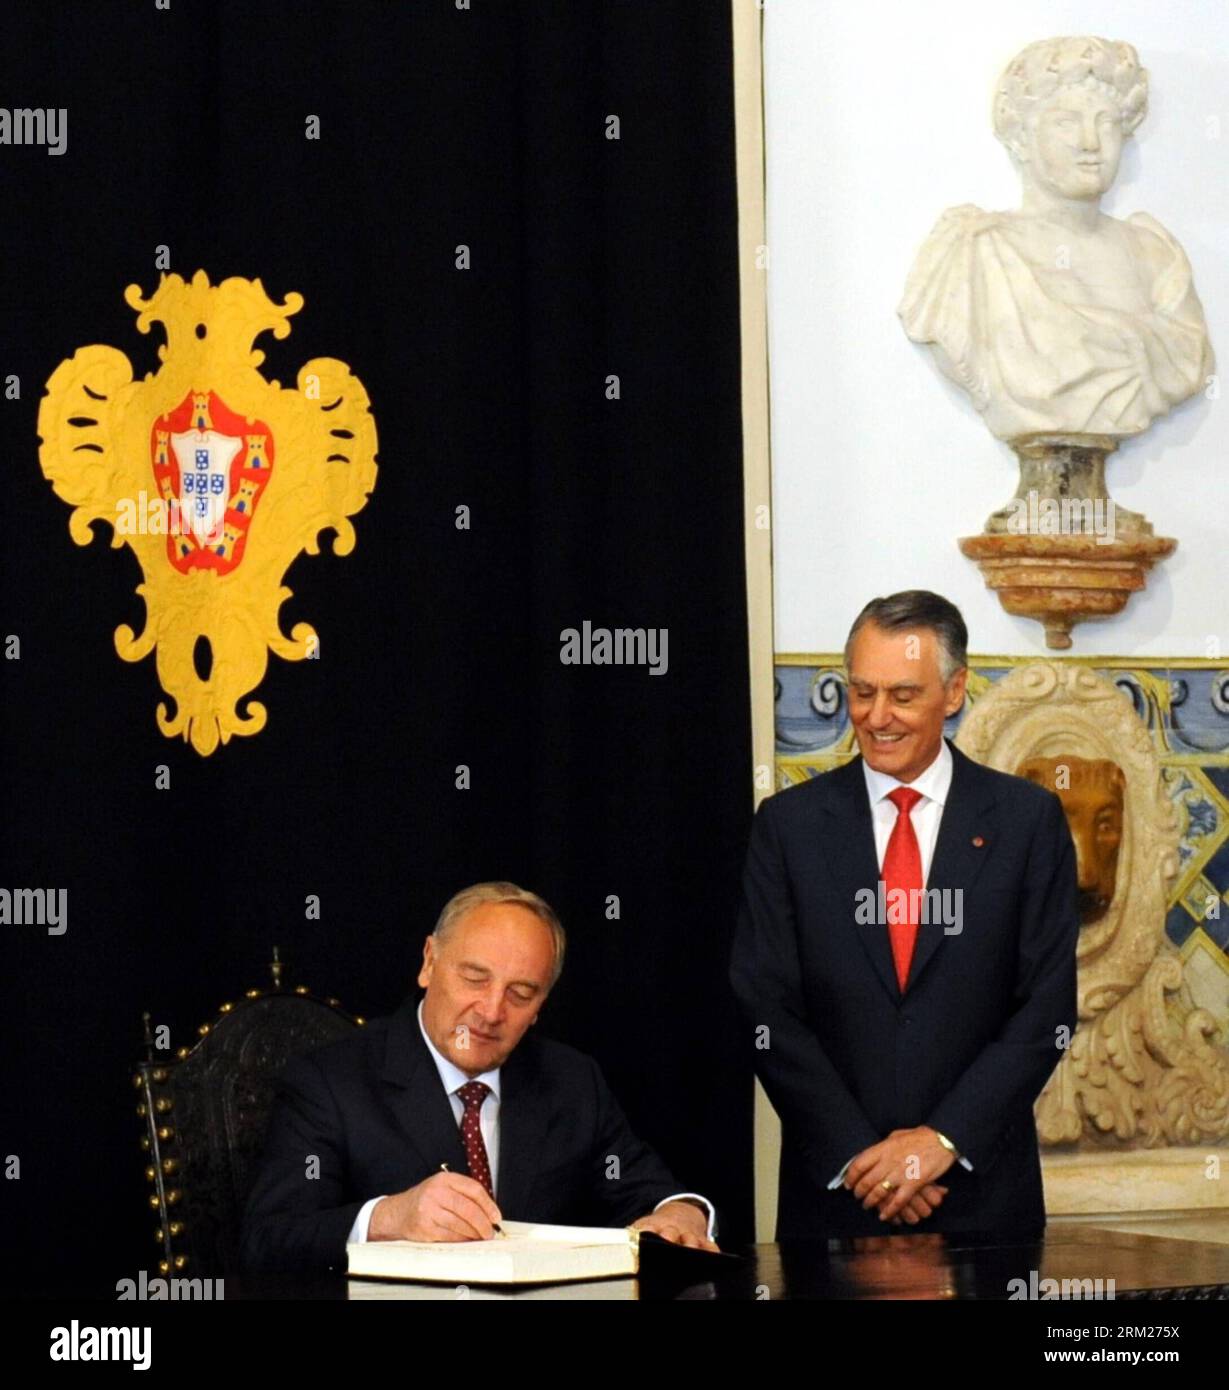 Bildnummer: 59721352  Datum: 28.05.2013  Copyright: imago/Xinhua (130528) -- LISBON, May 28, 2013 (Xinhua) -- Visiting Latvian President Andris Berzins (L) signs a guest book at Portugal s presidential palace in Lisbon on May 28, 2013. Berzins met with his Portuguese counterpart Anibal Cavaco Silva and Prime Minister Pedro Passos Coelho separately on Tuesday. Cavaco Silva said Portugal supports Latvia for its efforts to enter the Eurozone and the Organization for Economic Co-operation and Development (OECD). (Xinhua/Zhang Liyun) (zw) PORTUGAL-LATVIA-DIPLOMACY PUBLICATIONxNOTxINxCHN People Poli Stock Photo